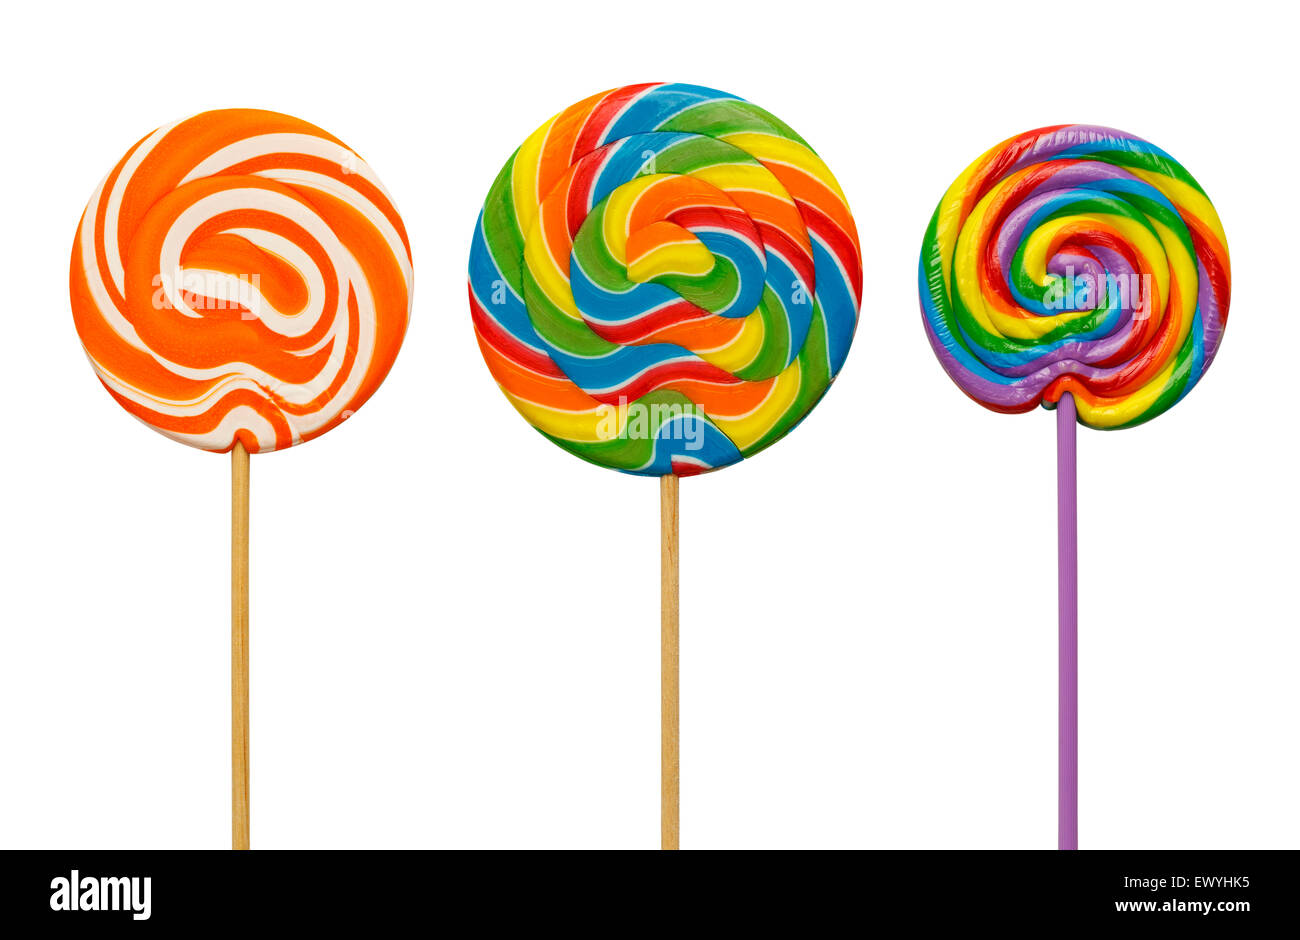 Colorful Spiral Candy Lollipops Isolated on White Background. Stock Photo